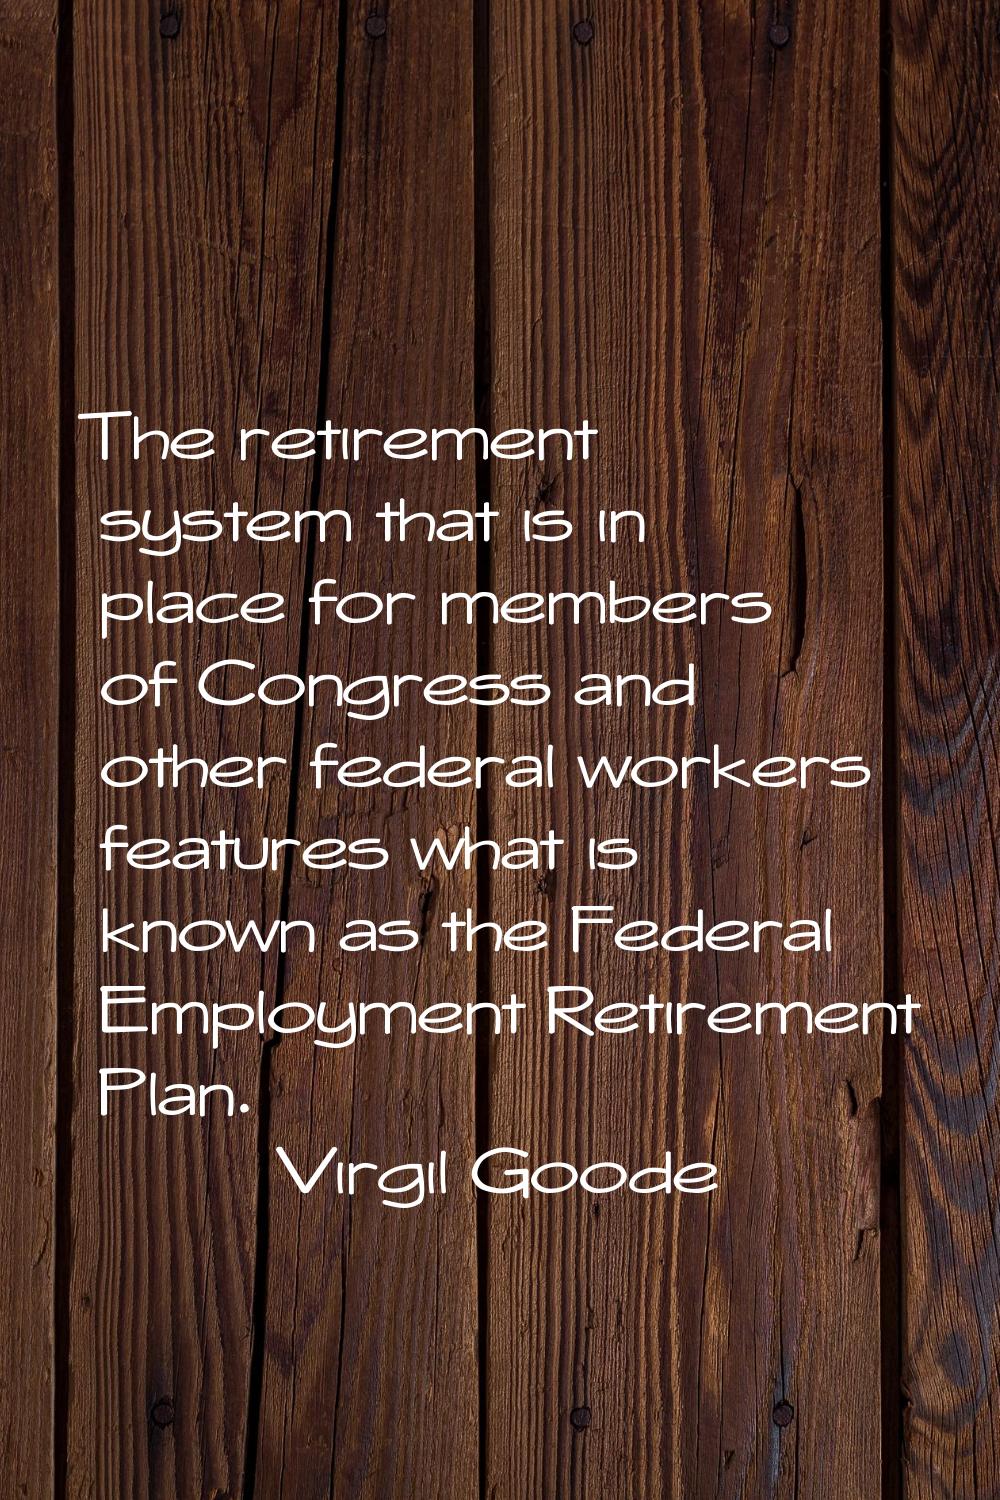 The retirement system that is in place for members of Congress and other federal workers features w